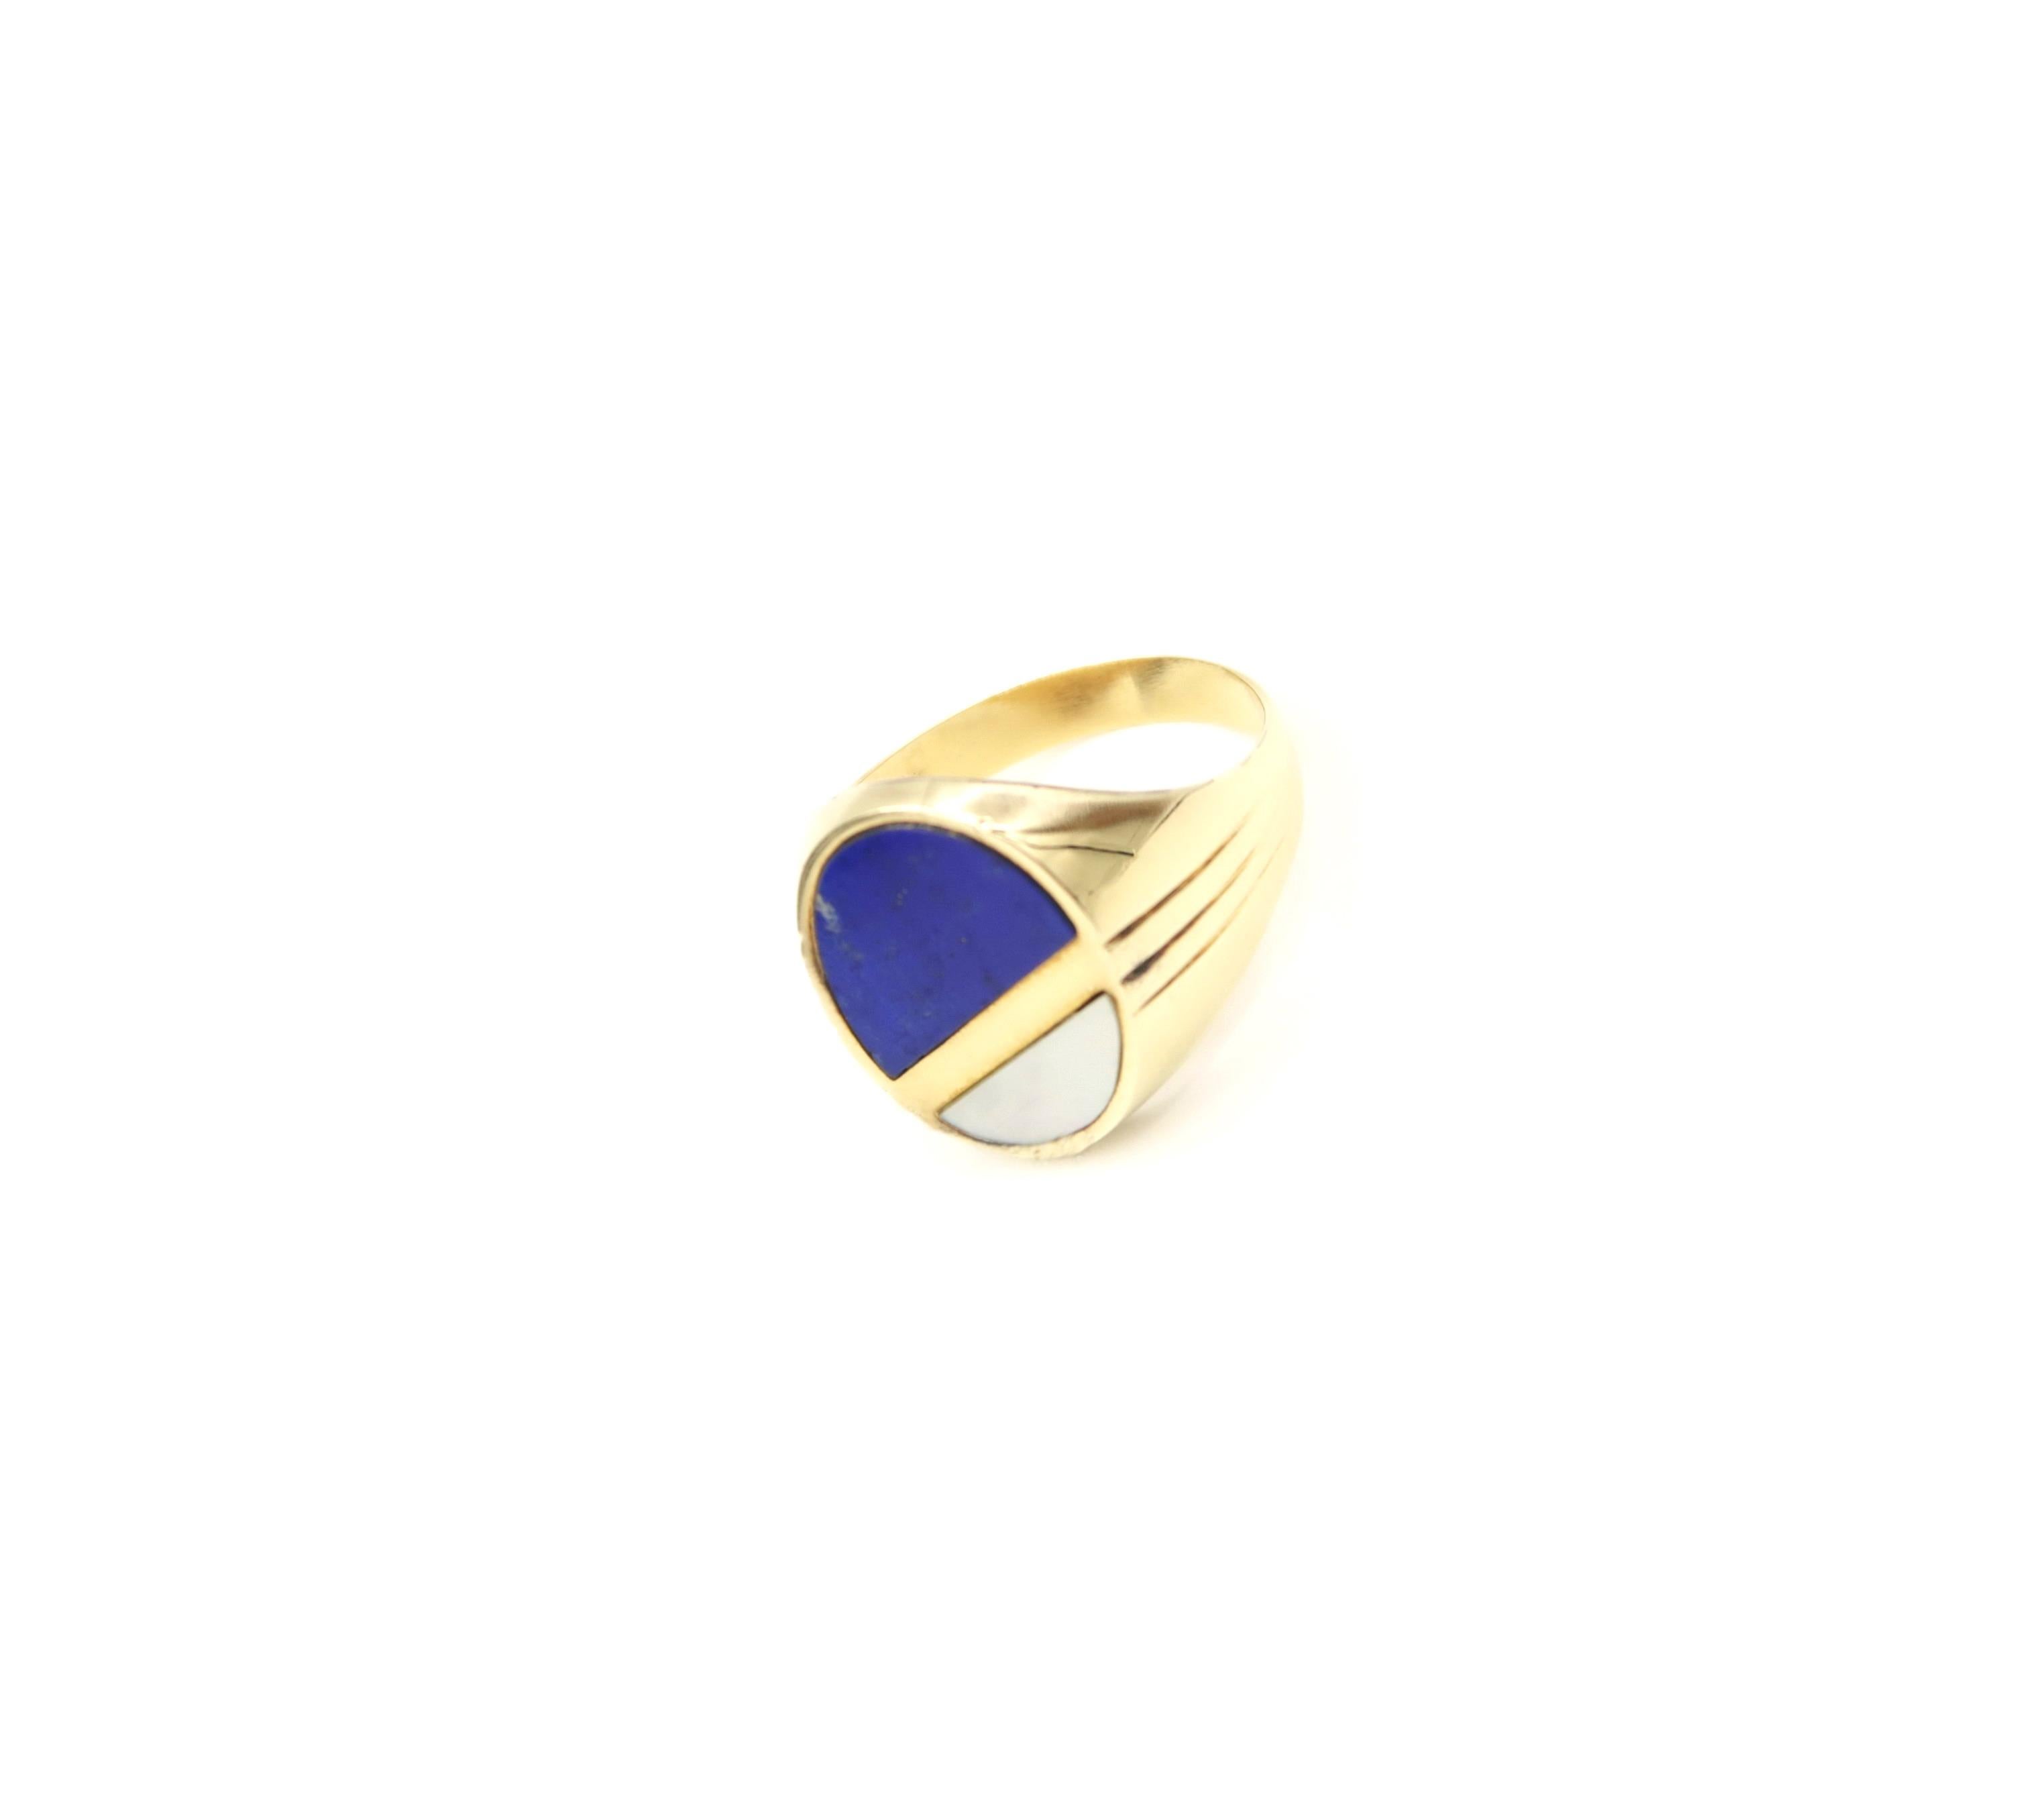 Lapis Lazuli and Mother of Pearl Oval Mens Signet Ring in 14 Karat Yellow Gold

Please let us know should you wish to have the ring resized or engraved. 

Ring Size: US 10, UK T

Gold: 14K 5.96g.
Mother of Pearl: 1pc.
Lapis Lazuli: 1 pc.